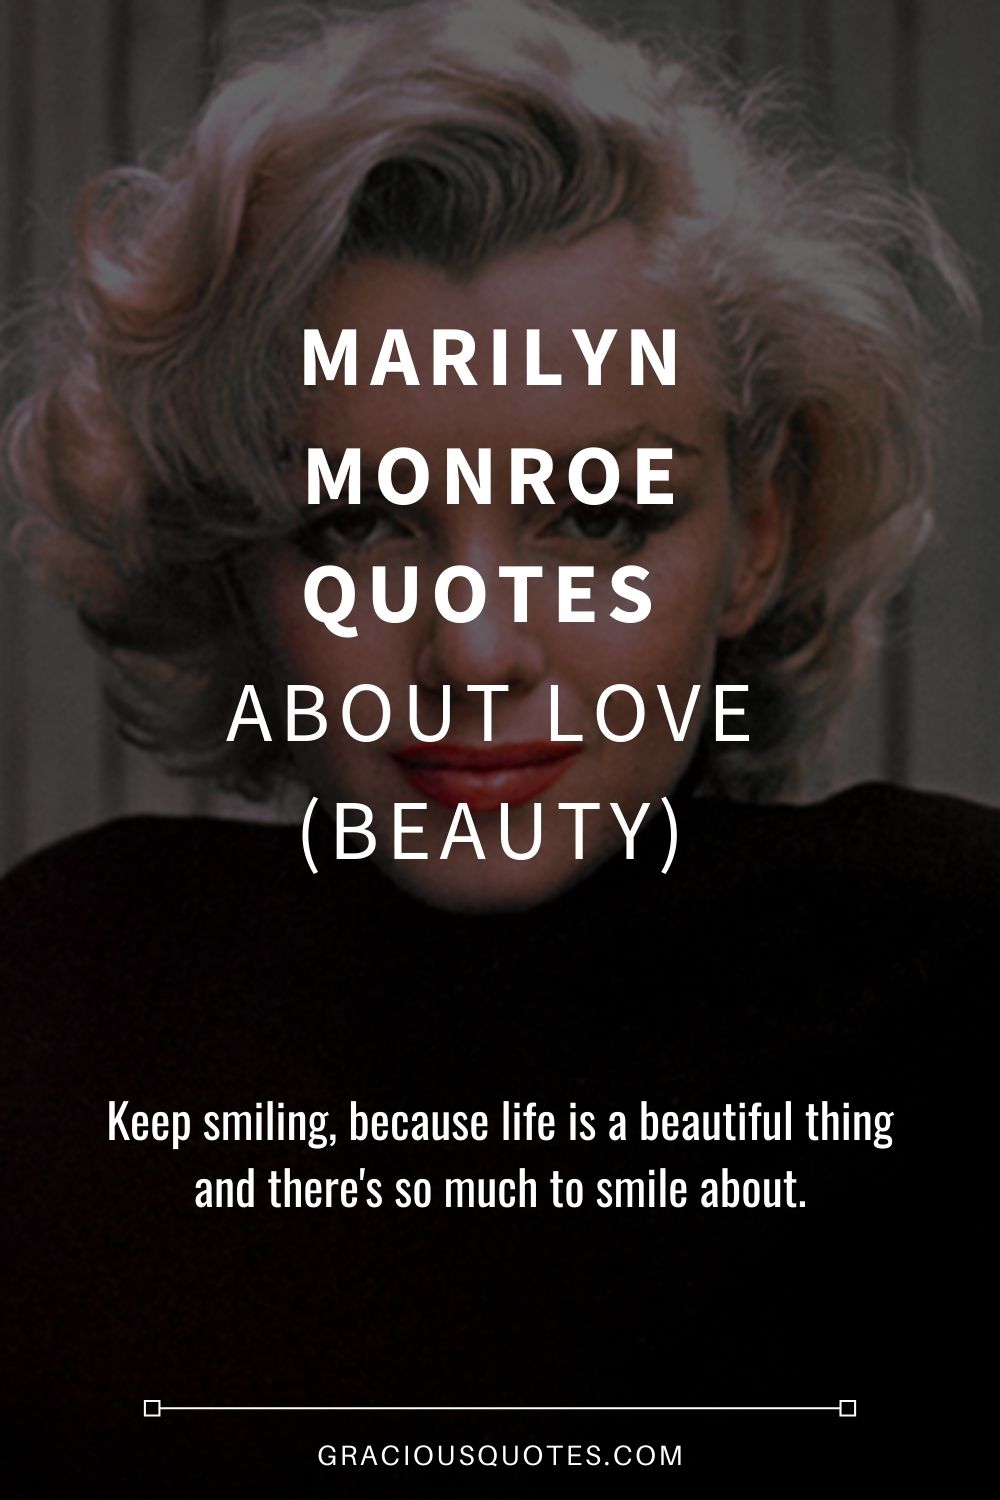 Marilyn Monroe Quotes About Love (BEAUTY) - Gracious Quotes